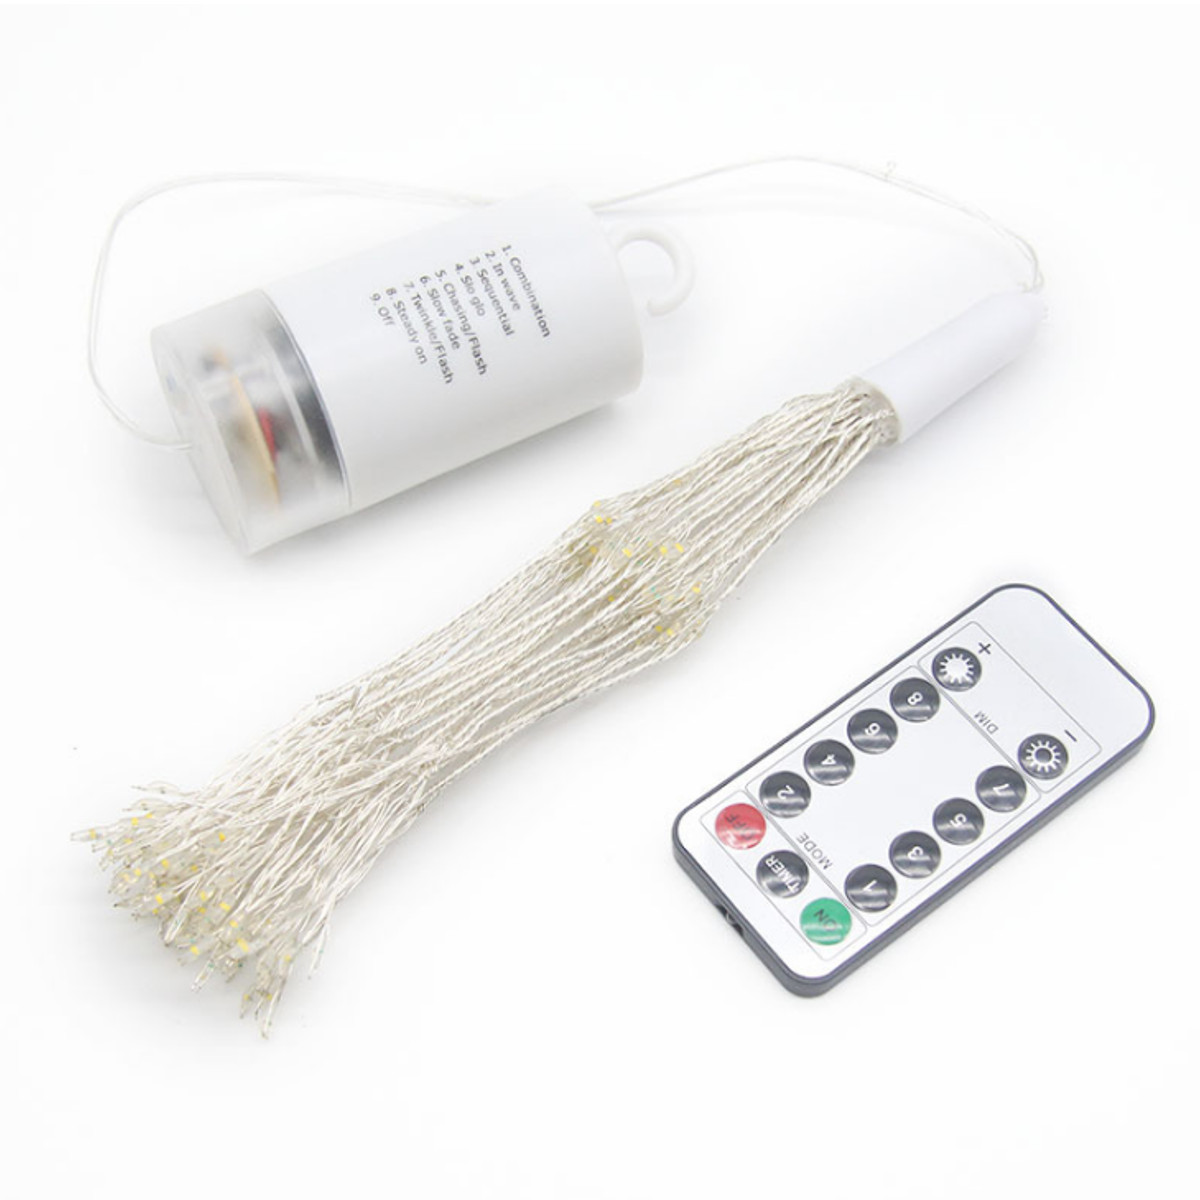 100200-LED-Firework-Light-8-Mode-Fairy-String-Lamp-with-Remote-Control-for-Home-Garden-Decor-1678624-3